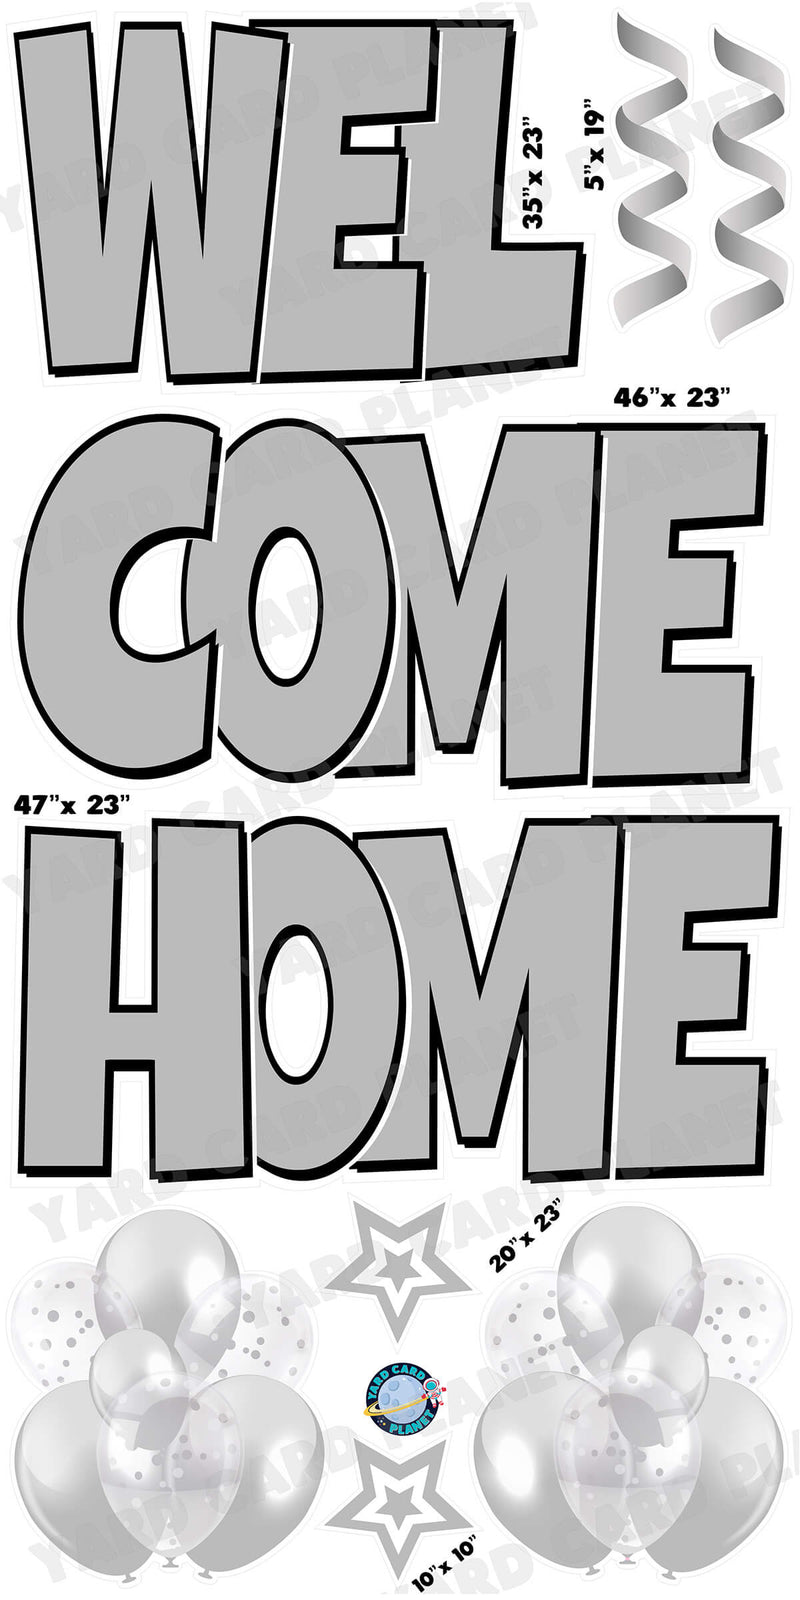 Large 23" Welcome Home Yard Card EZ Quick Sets in Luckiest Guy Font and Flair in Grey Solid Color